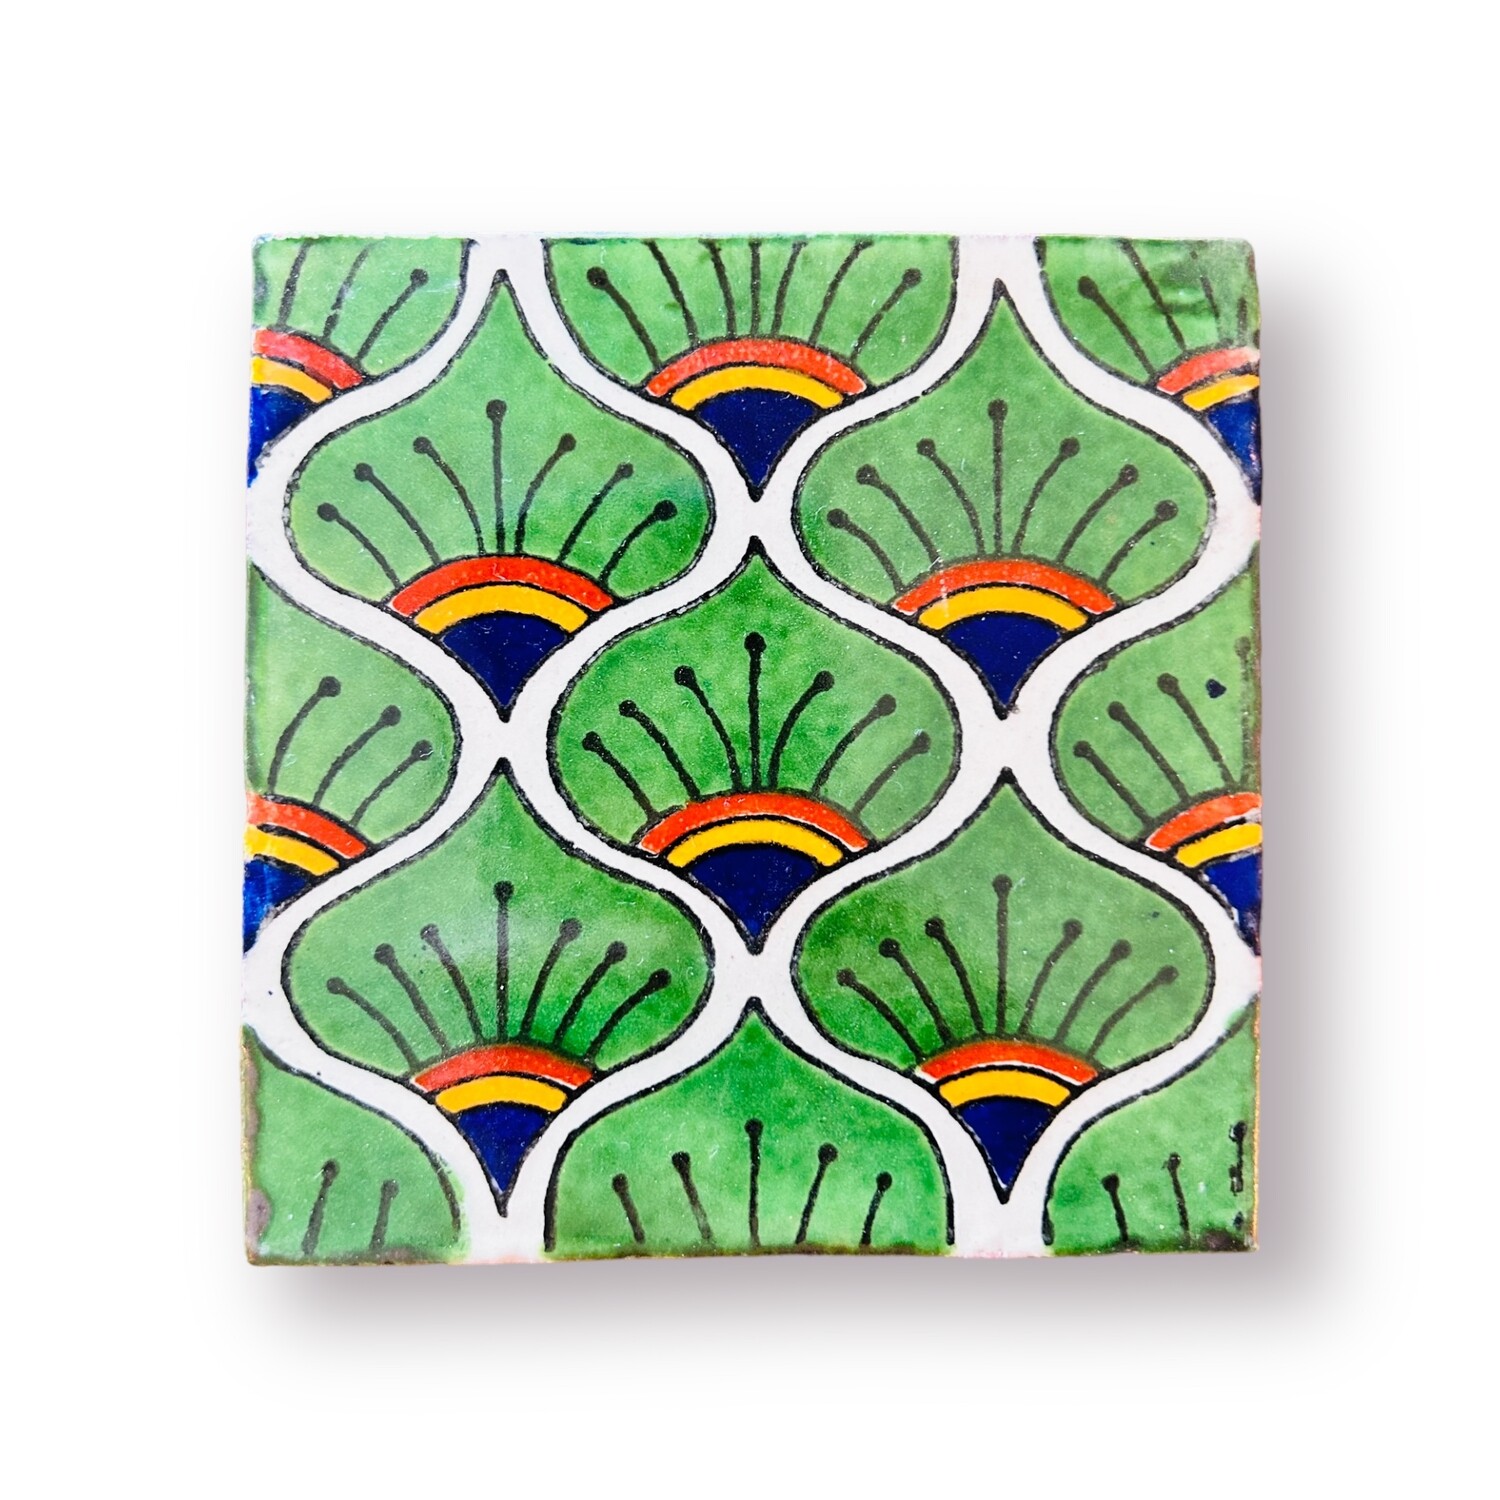 Pavo Real, Purchase Options: Pavo Real - Box of 6 tiles